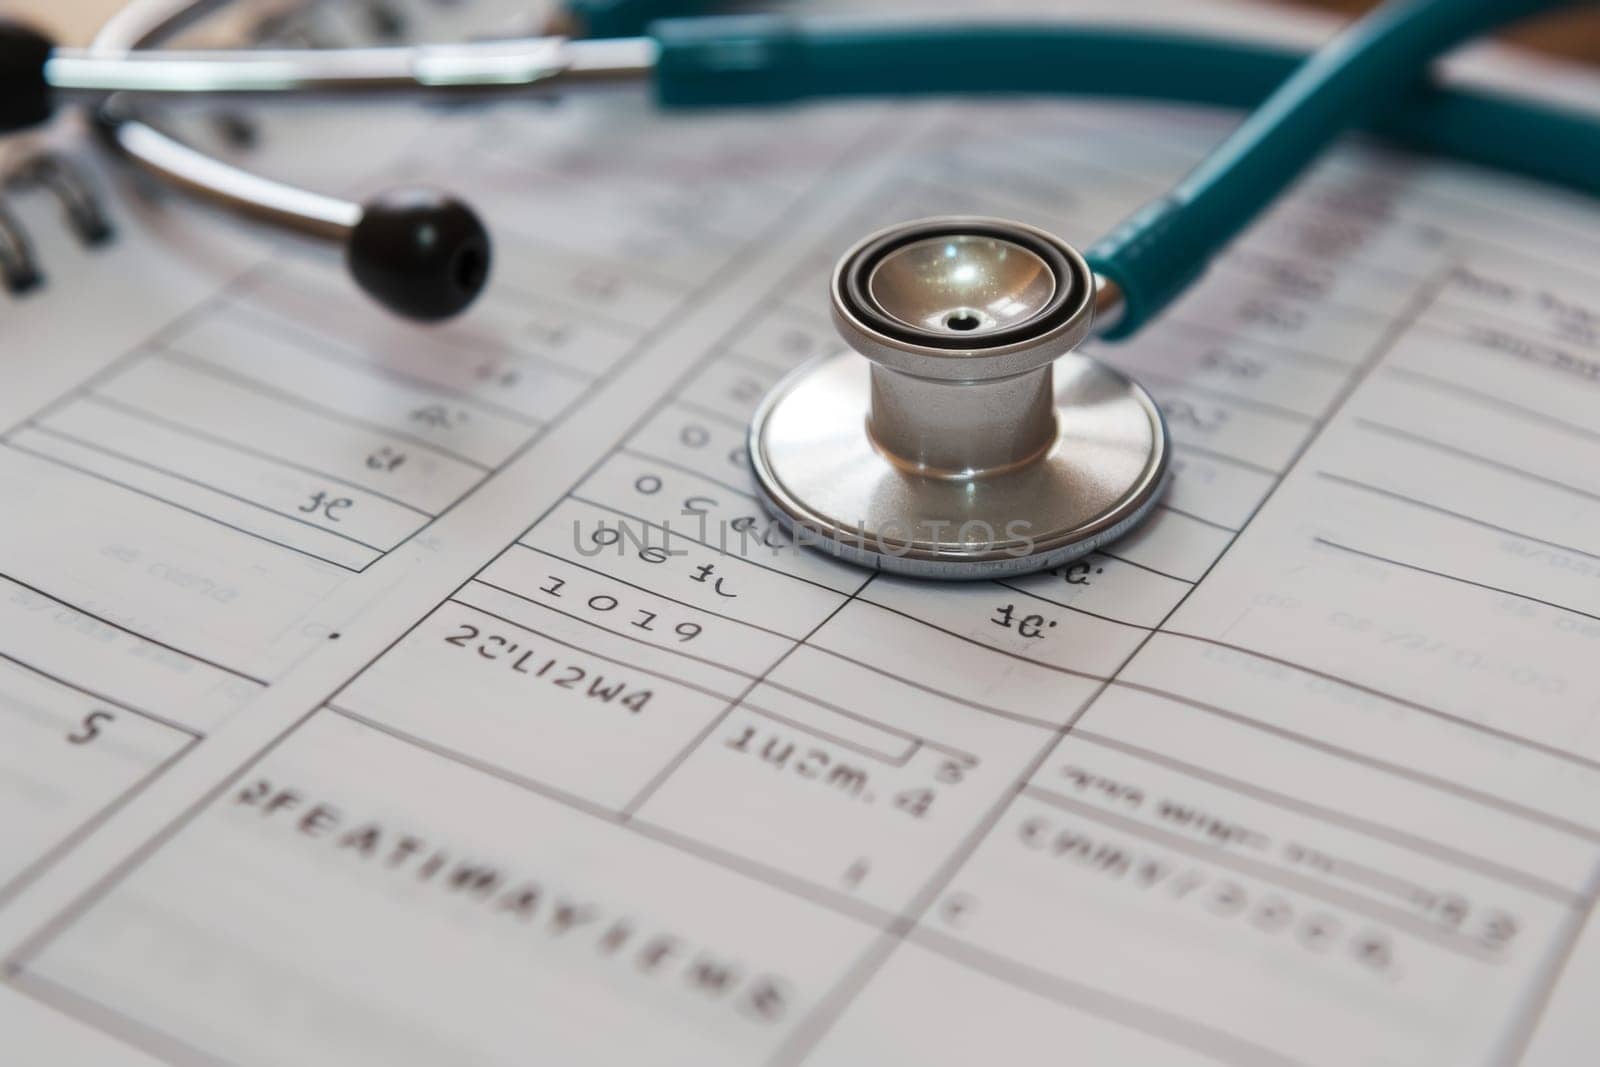 A stethoscope resting on a calendar, marking important healthcare check-ups and appointments.